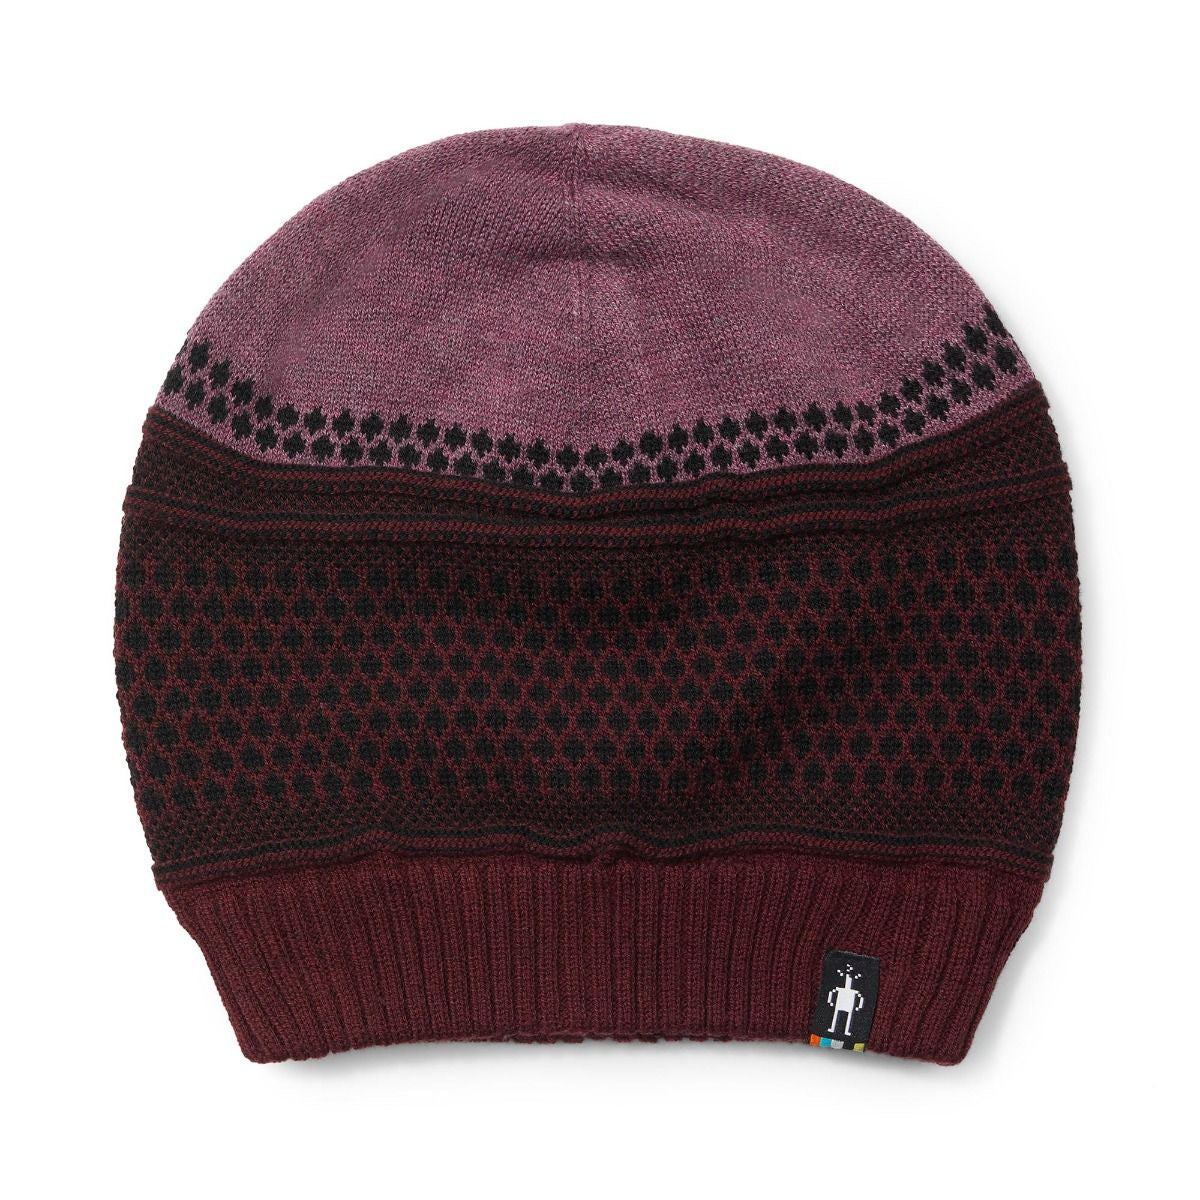 SMARTWOOL - POPCORN CABLE BEANIE IN BLACK CHERRY HEATHER